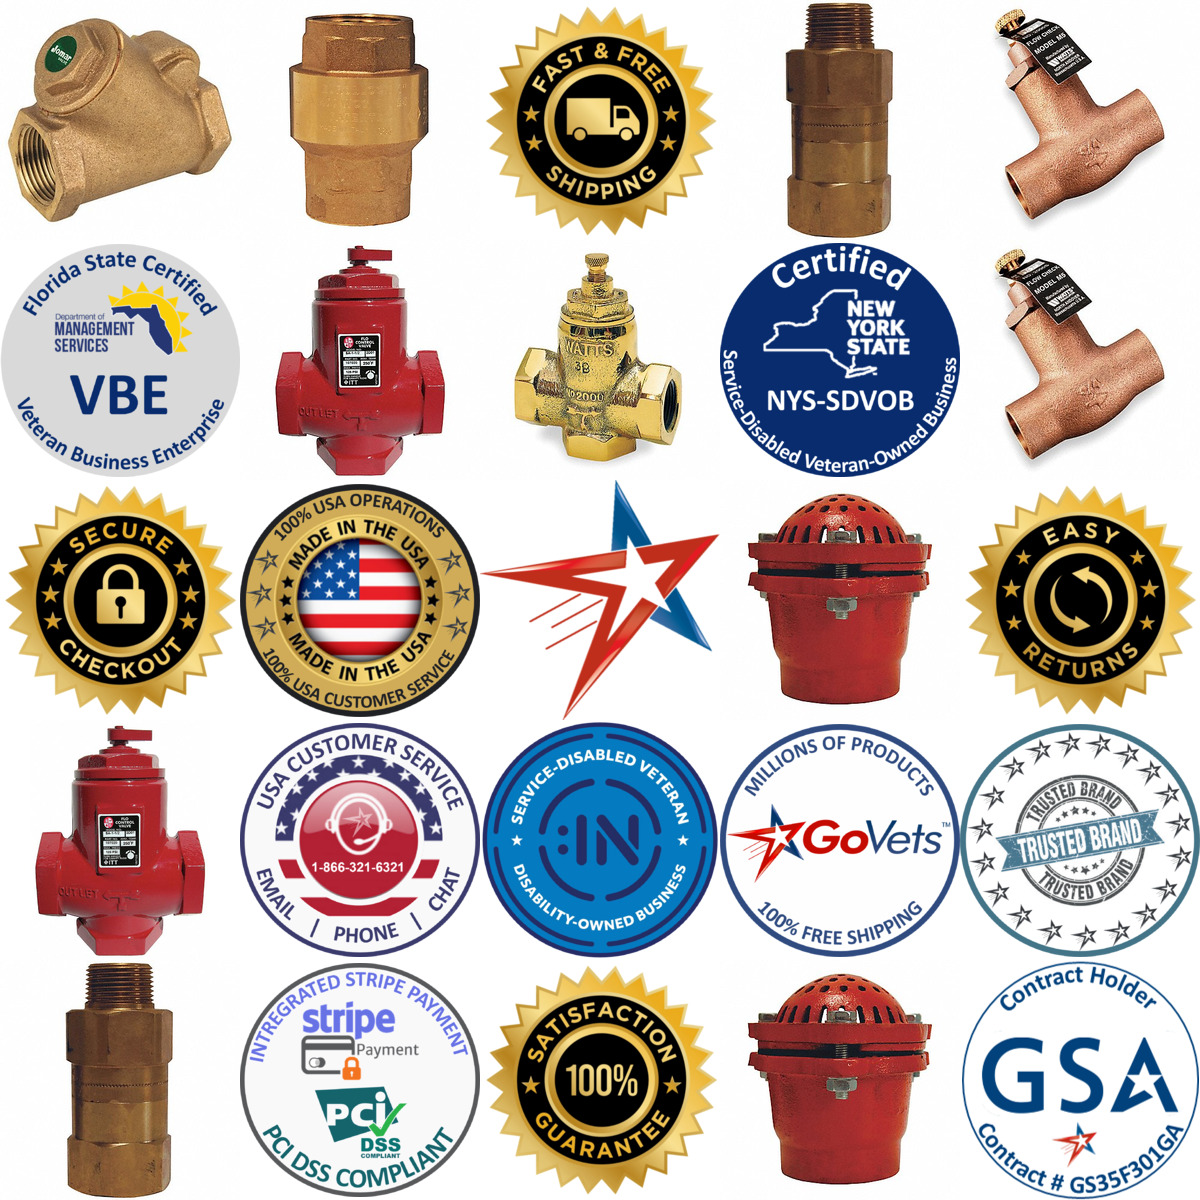 A selection of Flow Control Check Valves products on GoVets